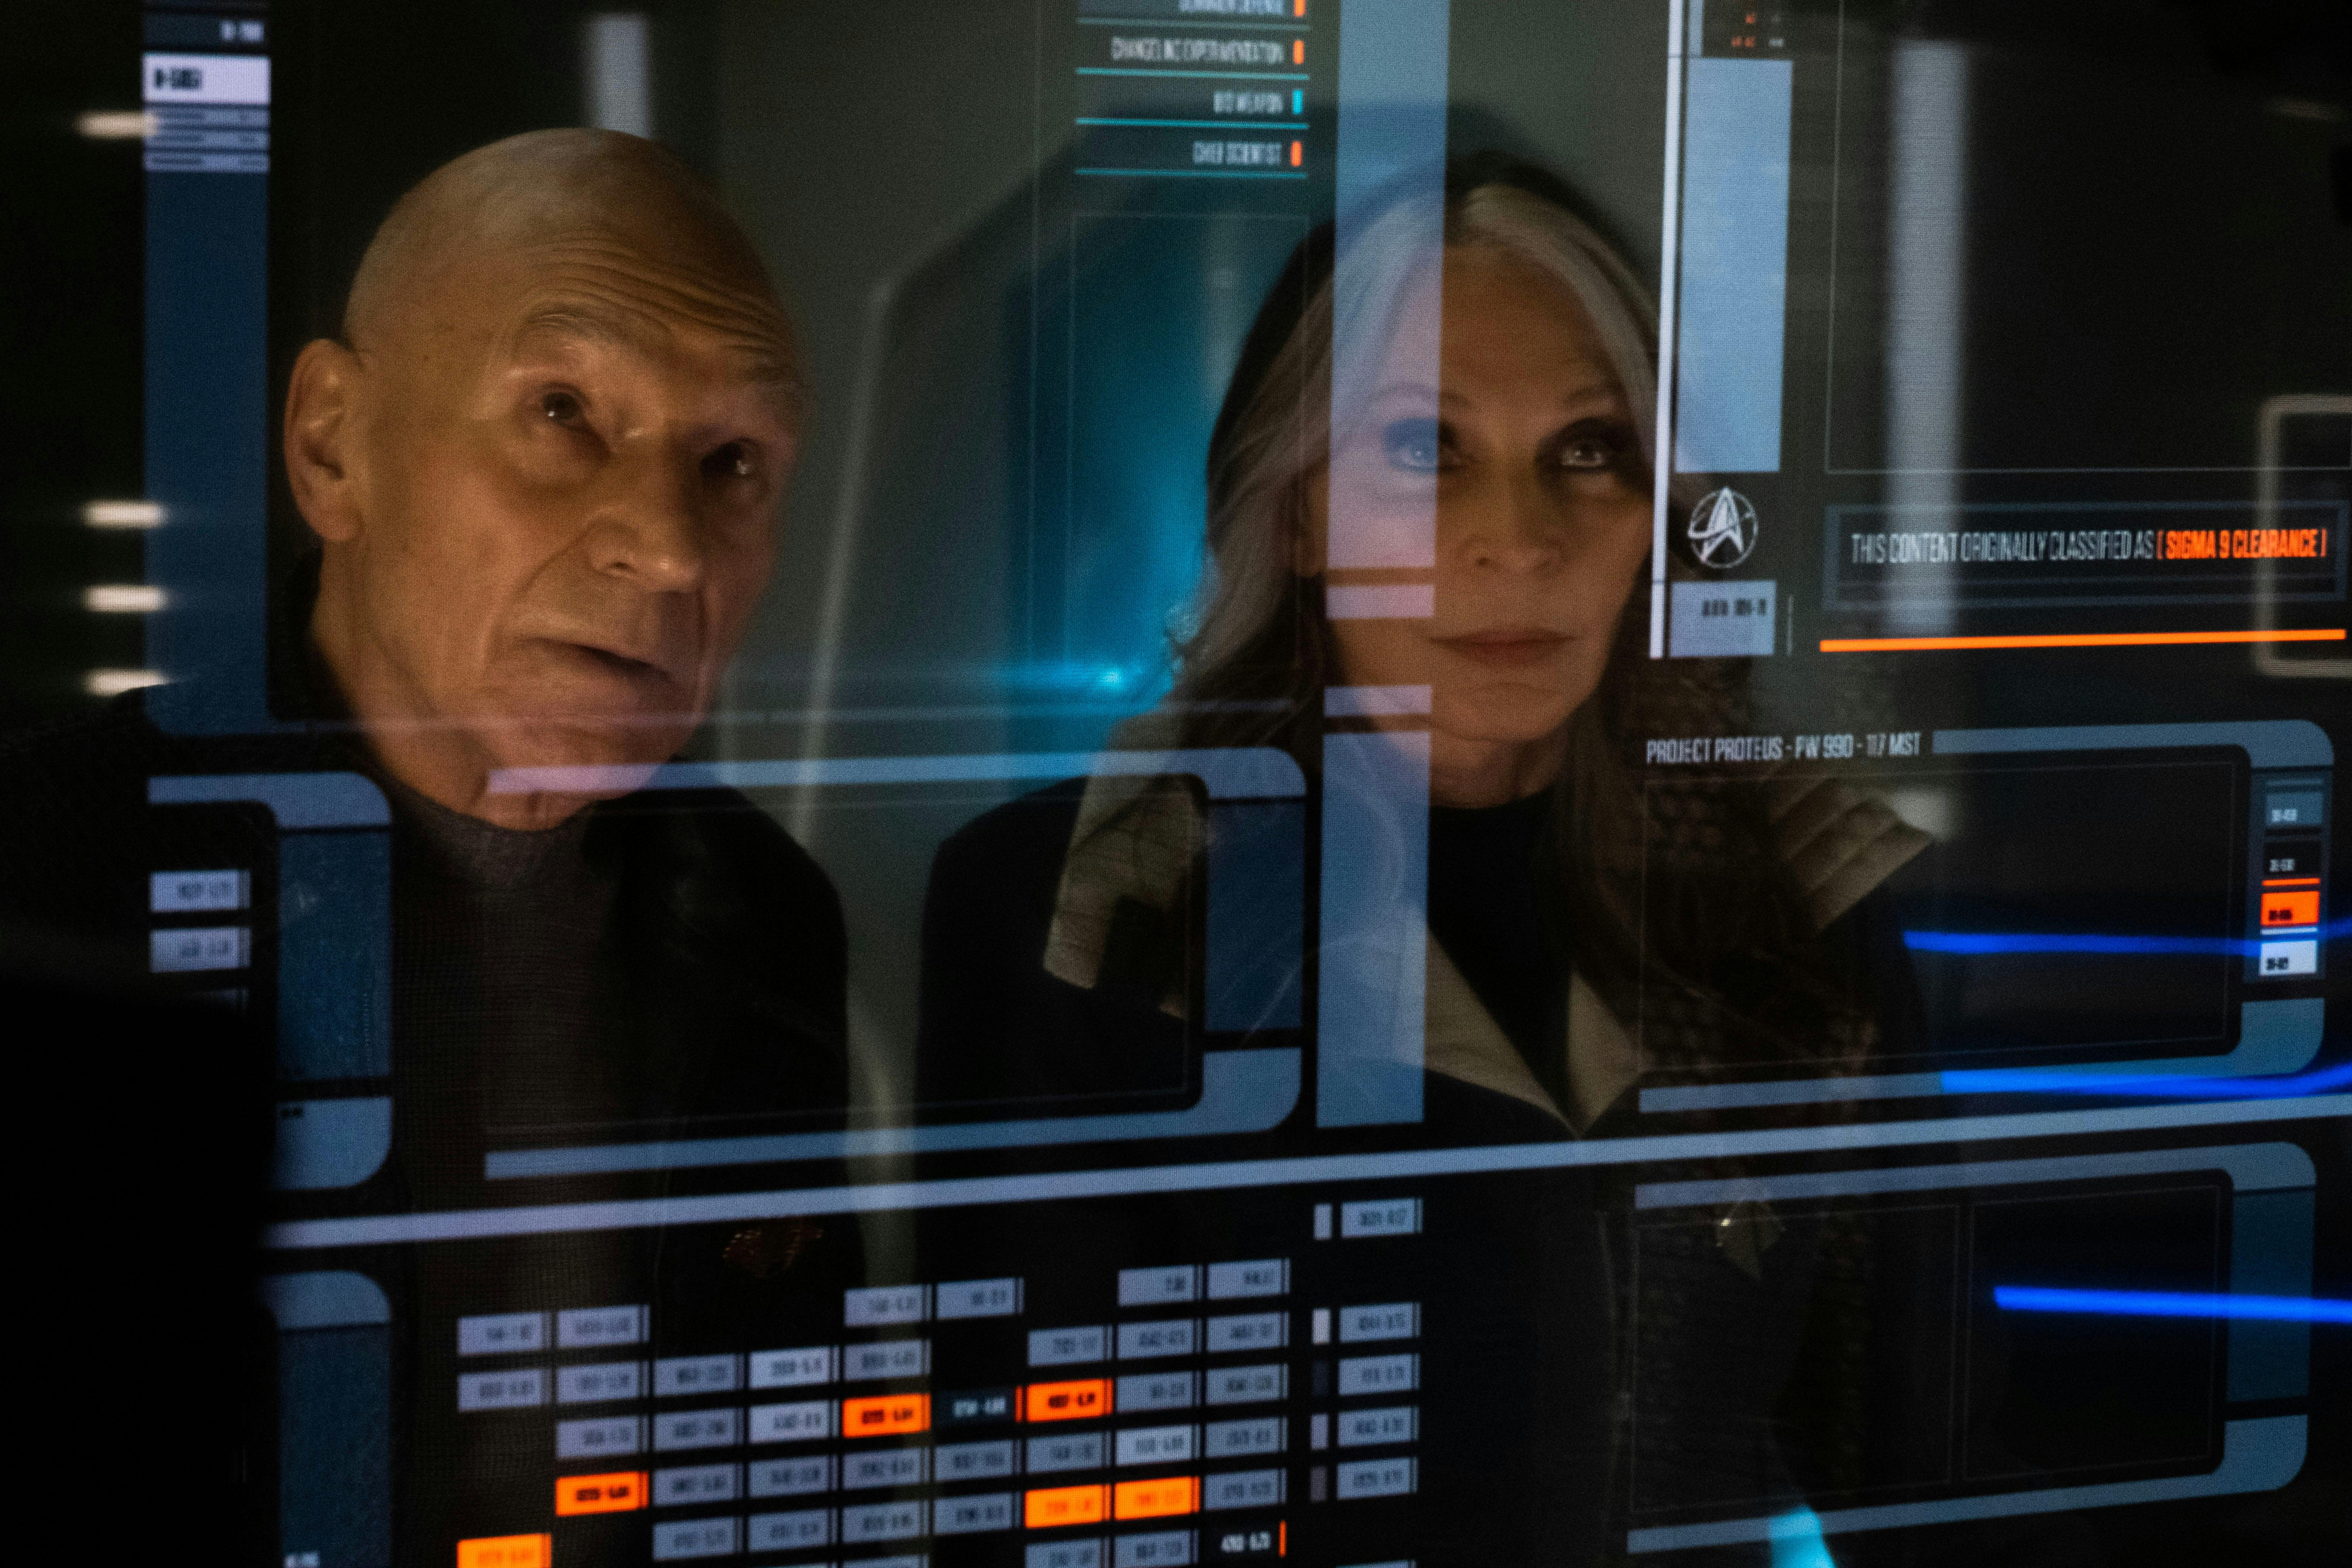 Picard and Beverly Crusher look up Project Proteus in the Daystrom manifest